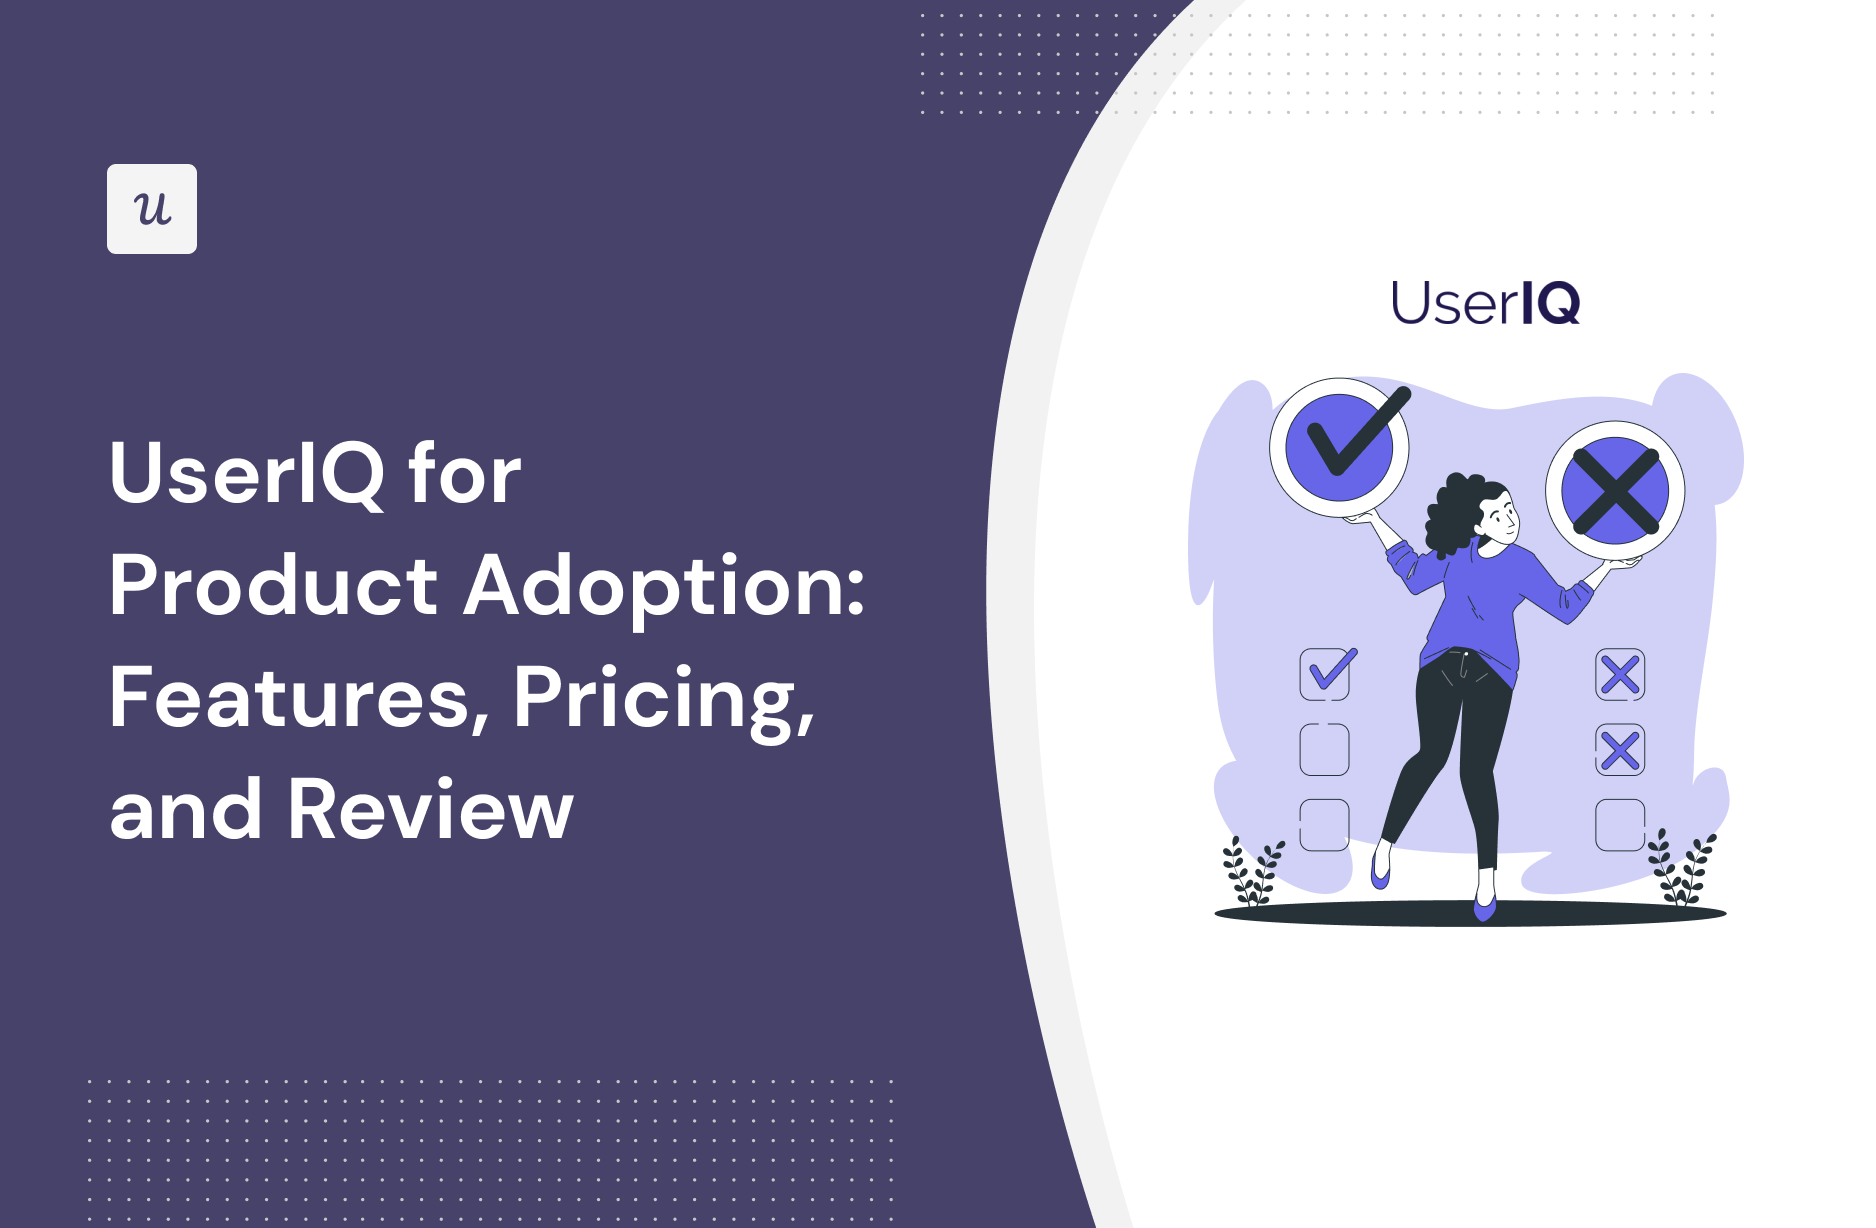 UserIQ for Product Adoption: Features, Pricing, and Review